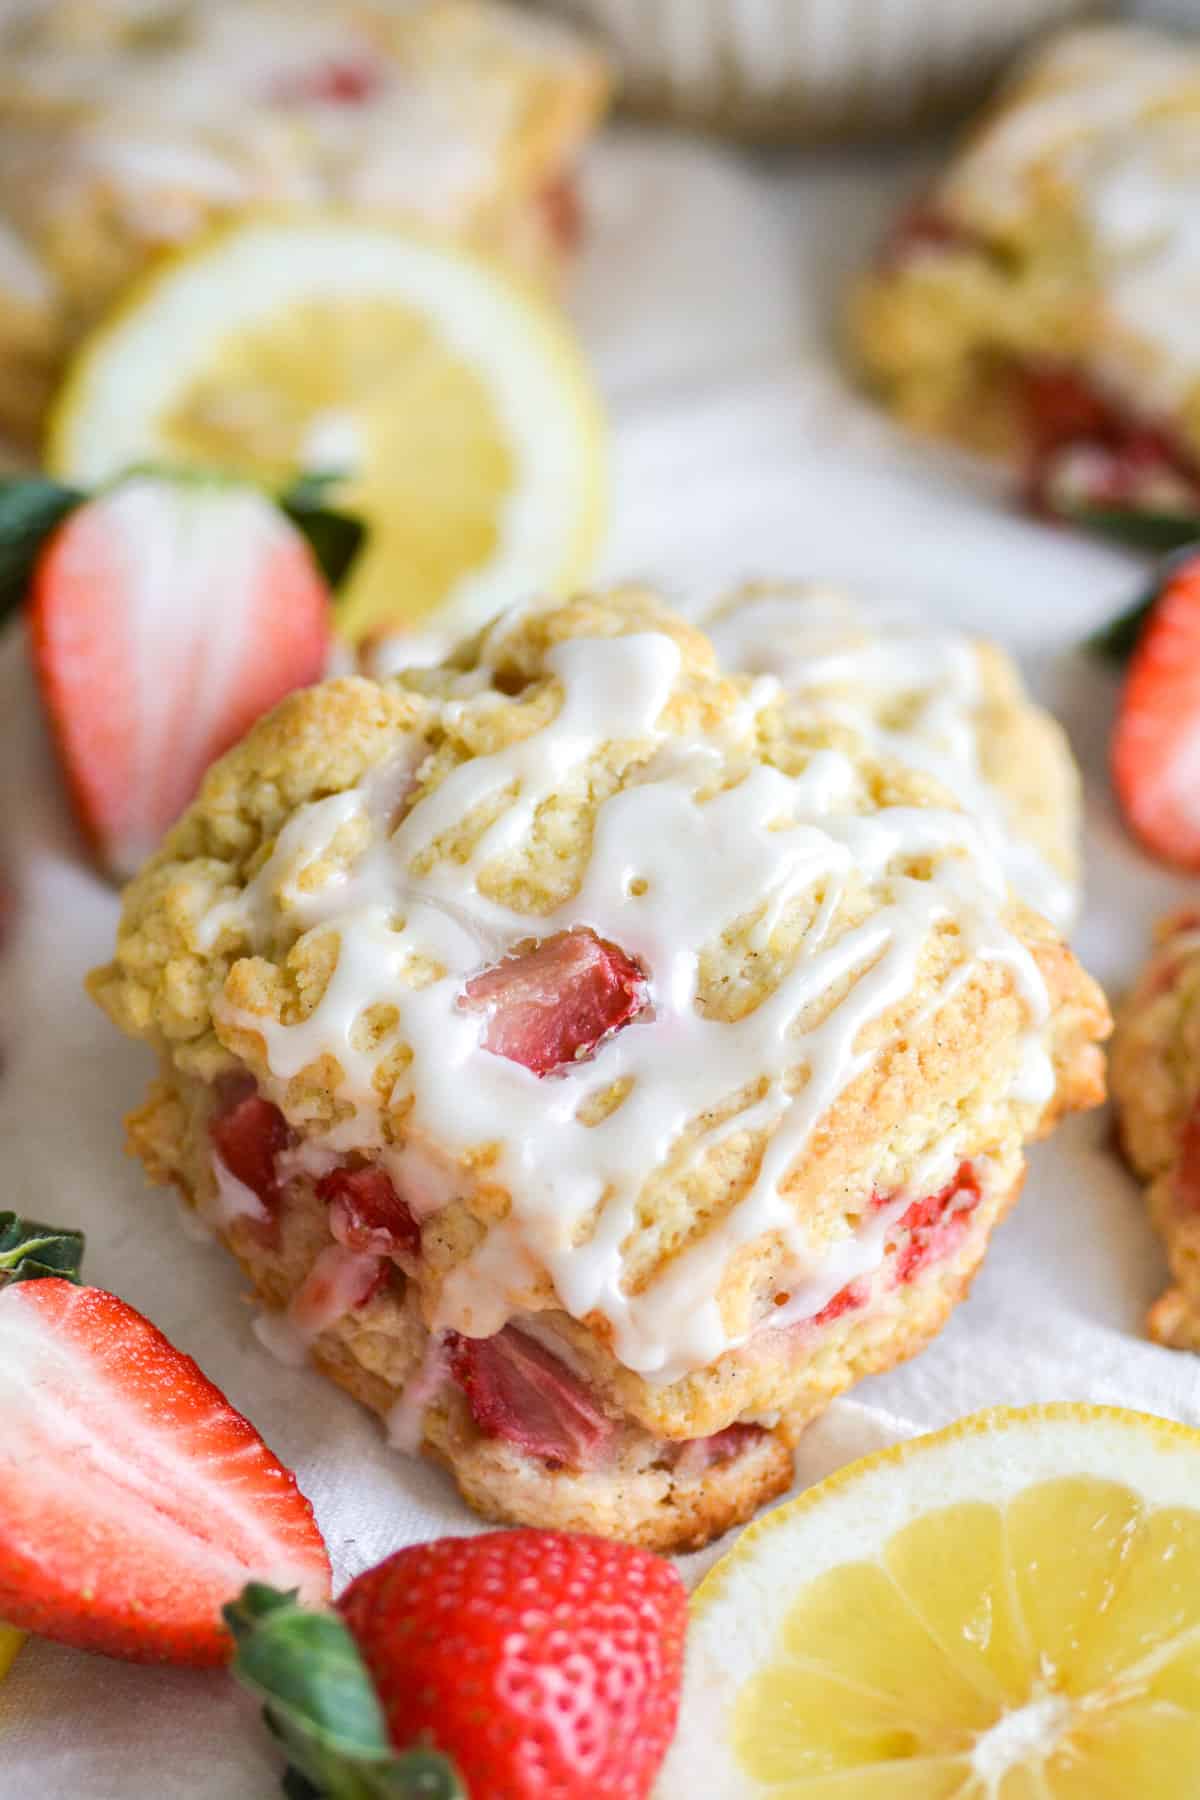 Vegan Lemon Strawberry Scones on a white cloth with strawberries and sliced lemon in the scene.